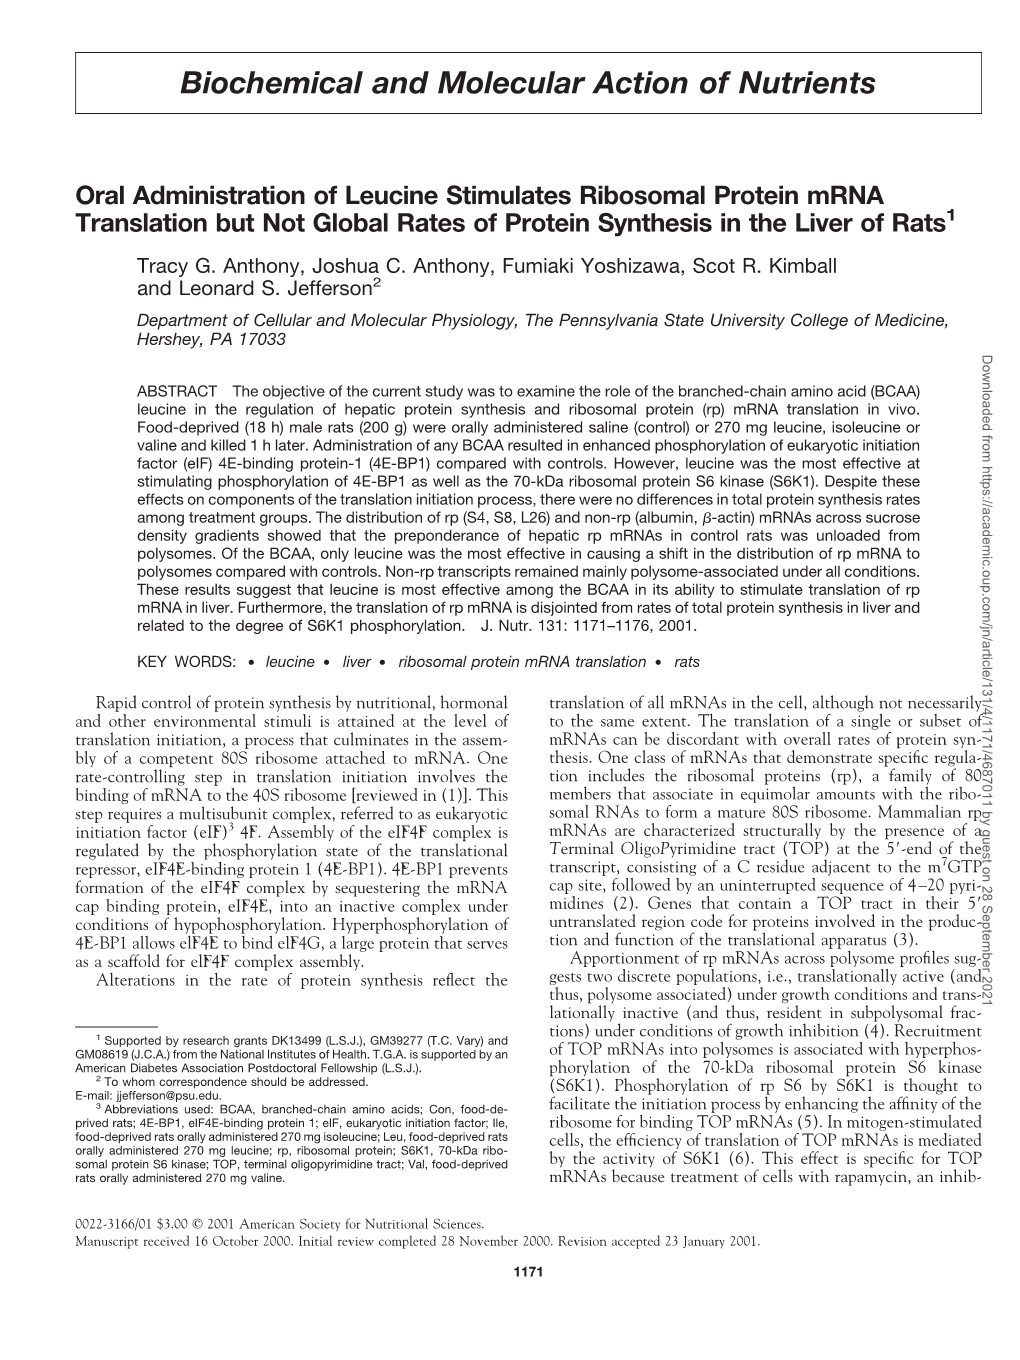 Oral Administration of Leucine Stimulates Ribosomal Protein Mrna Translation but Not Global Rates of Protein Synthesis in the Liver of Rats1 Tracy G